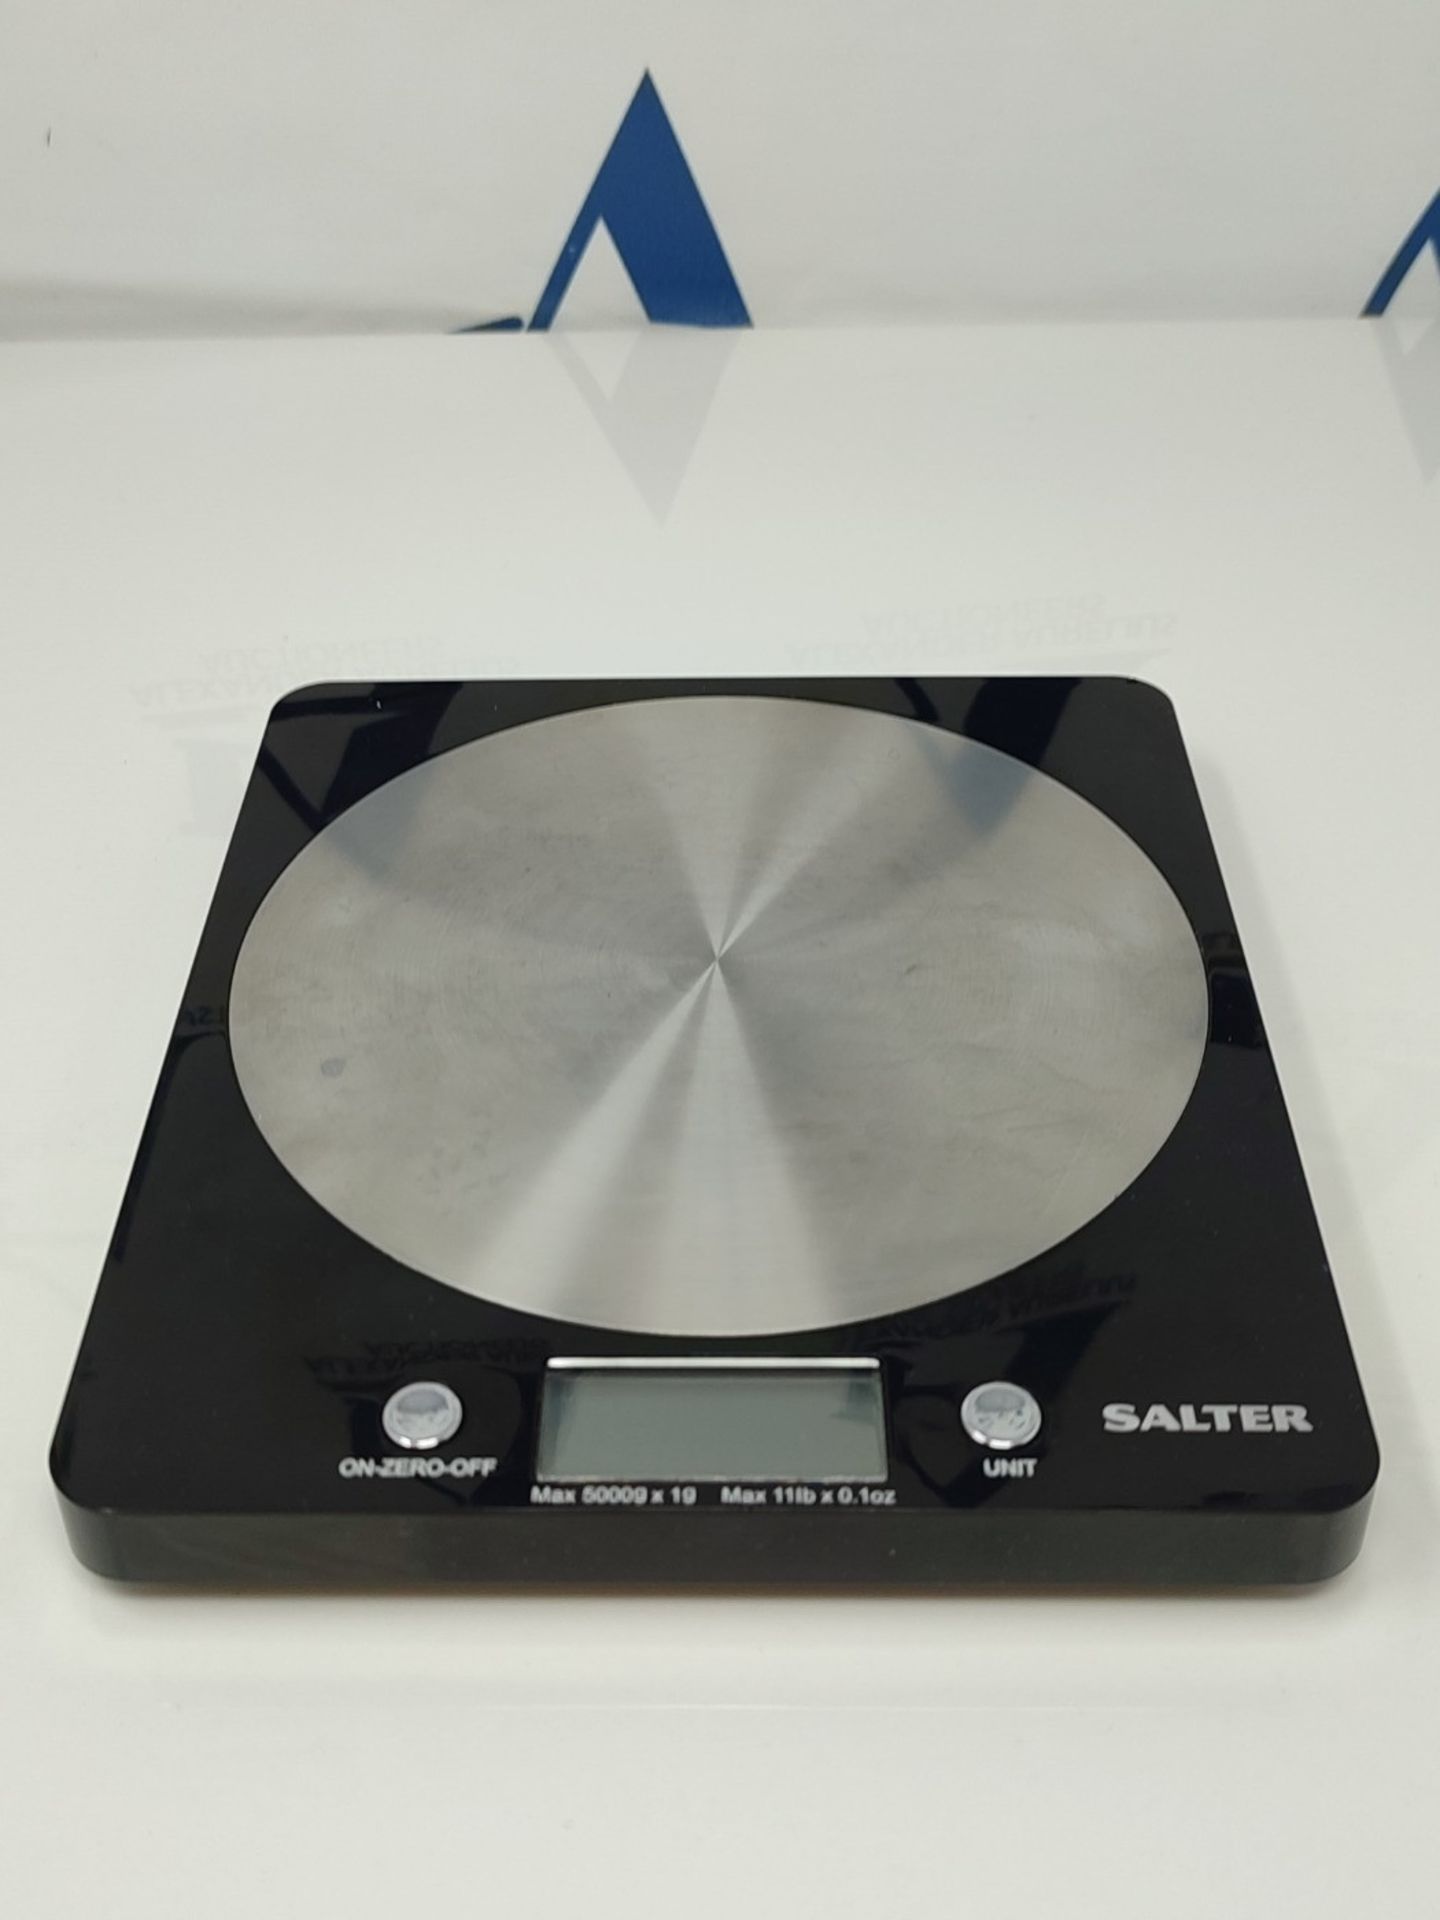 Salter Digital Seen on TV, Stylish Slim Design Electronic Cooking Scale for Home + Kit - Image 2 of 2